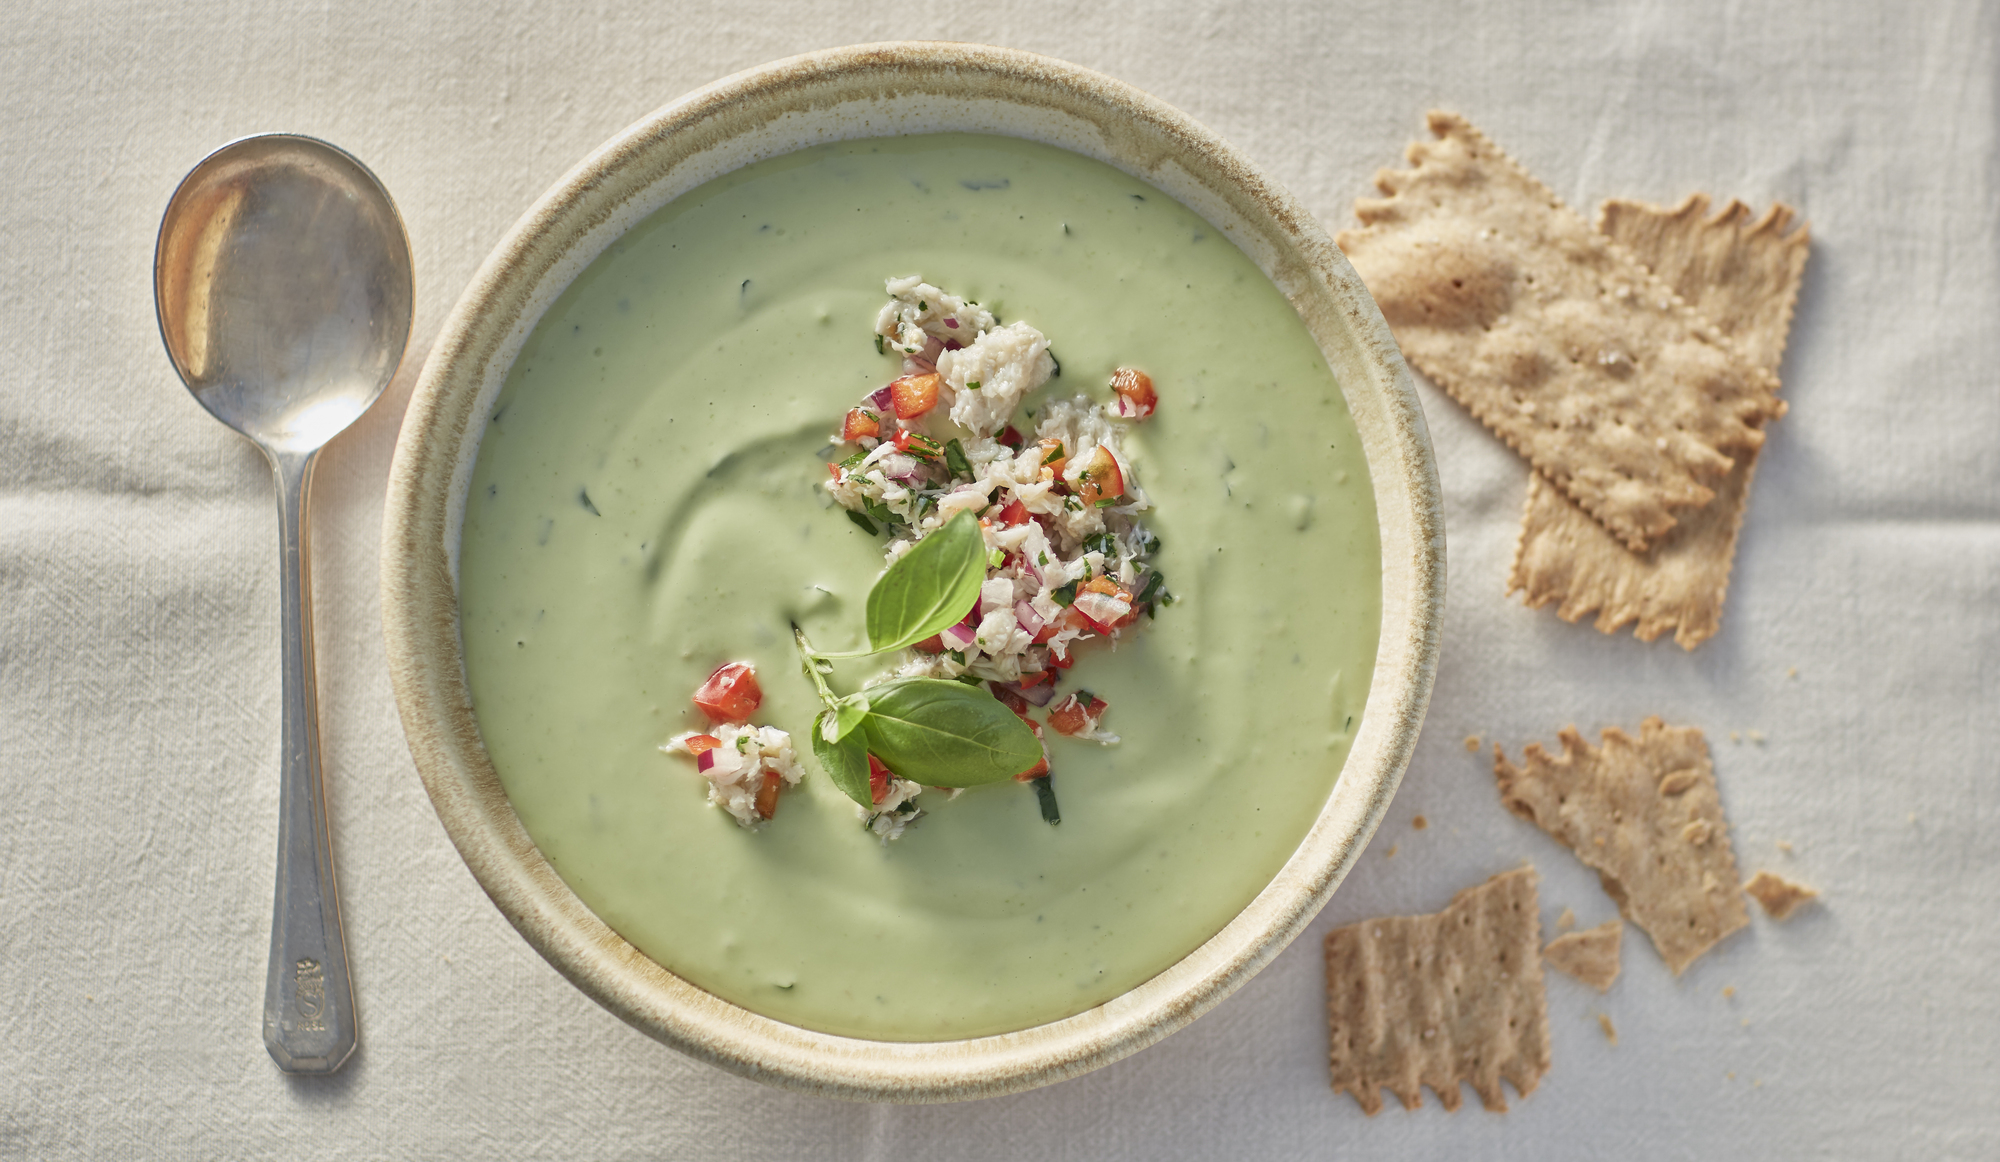 Avocado Soup With Crab Salad. Food styling: Lisa Golden Schroeder.